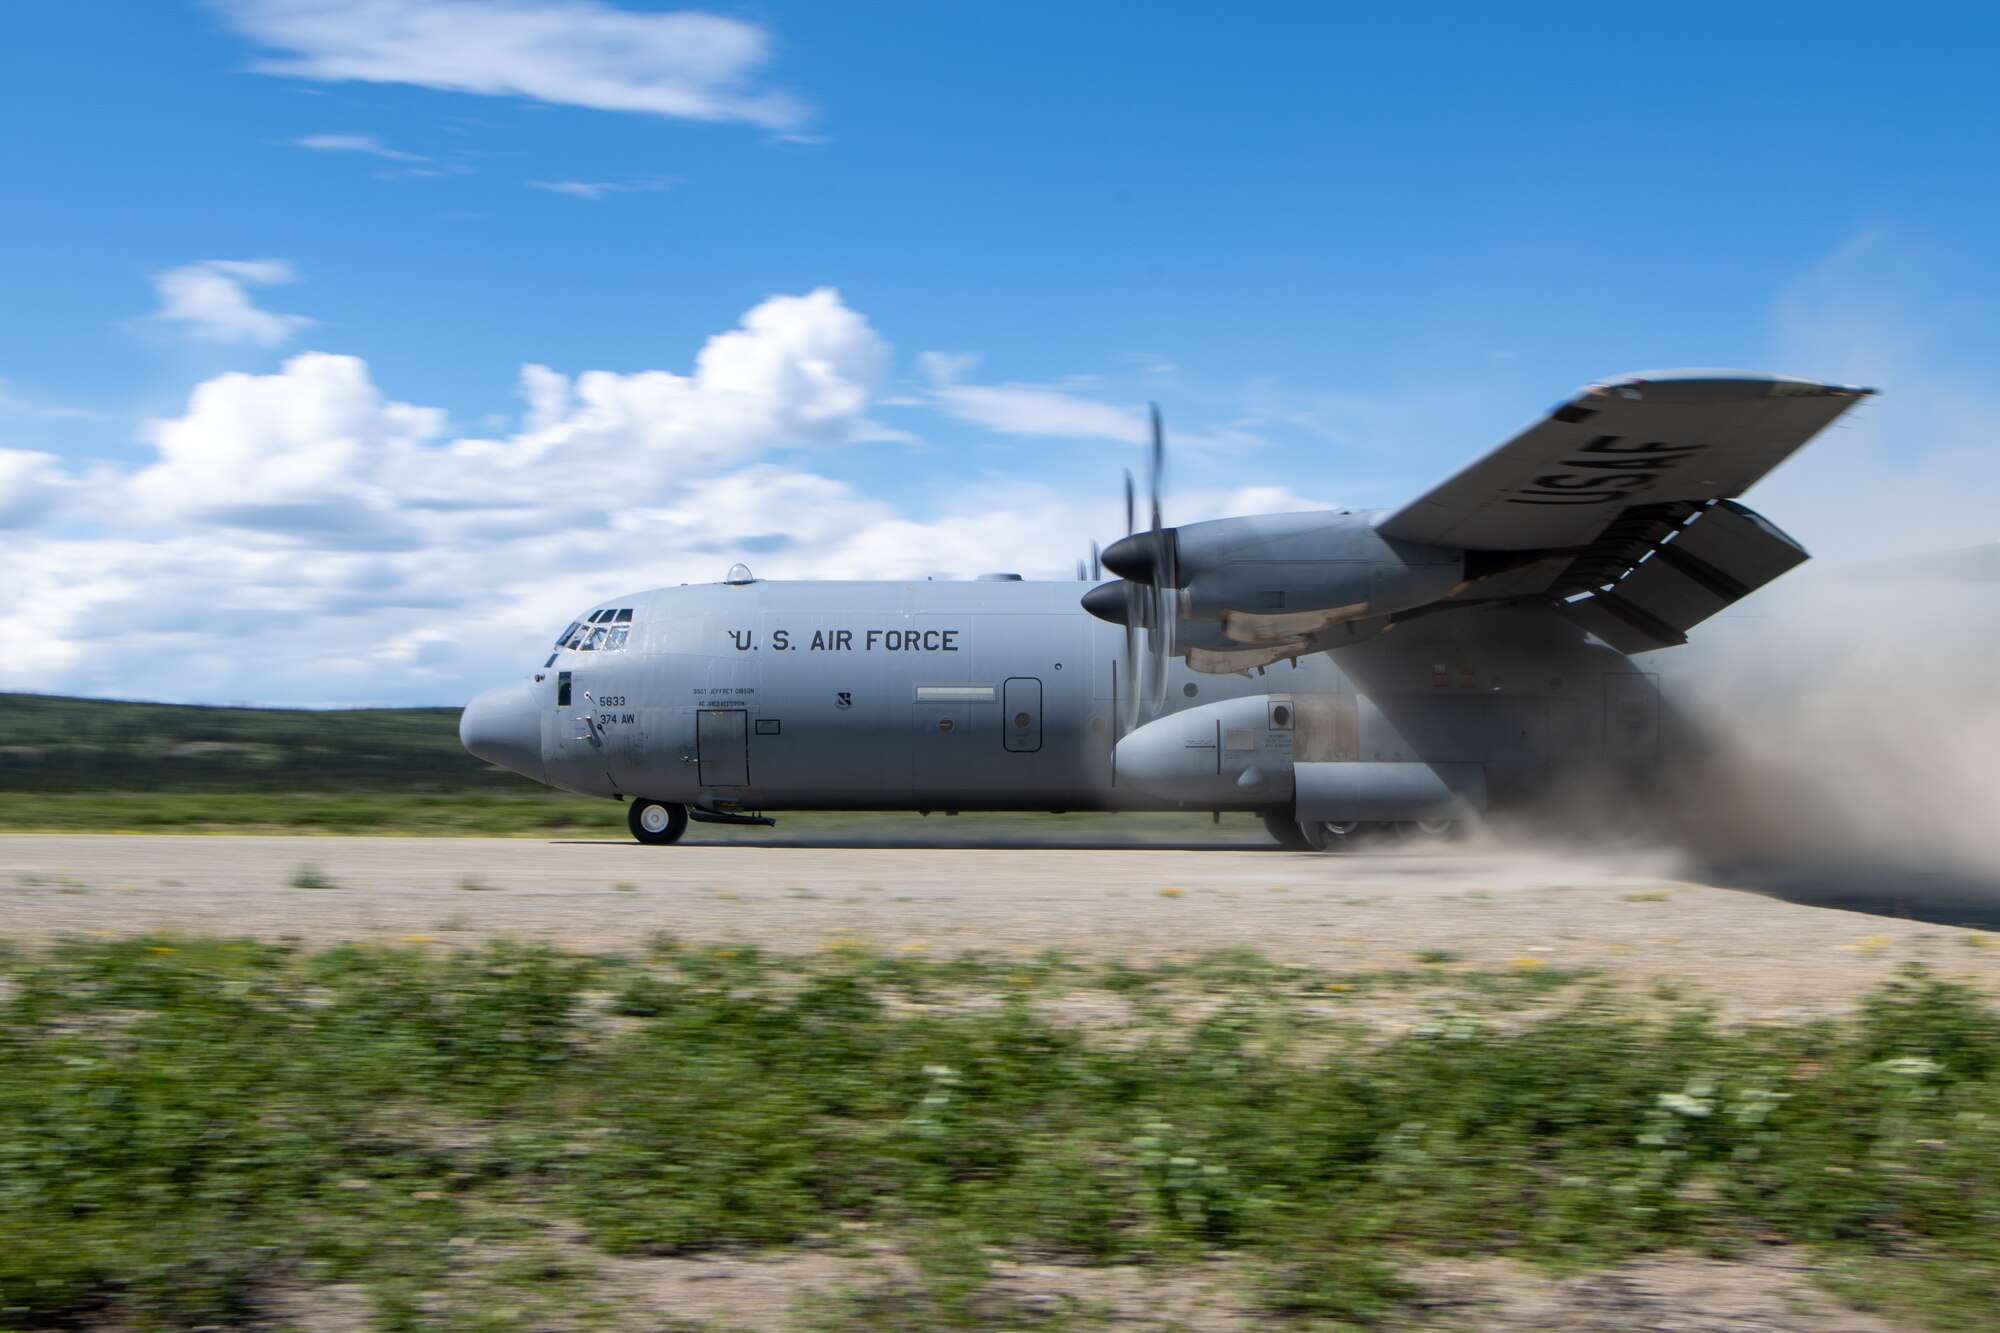 A C-130 take off from a dirt runway.